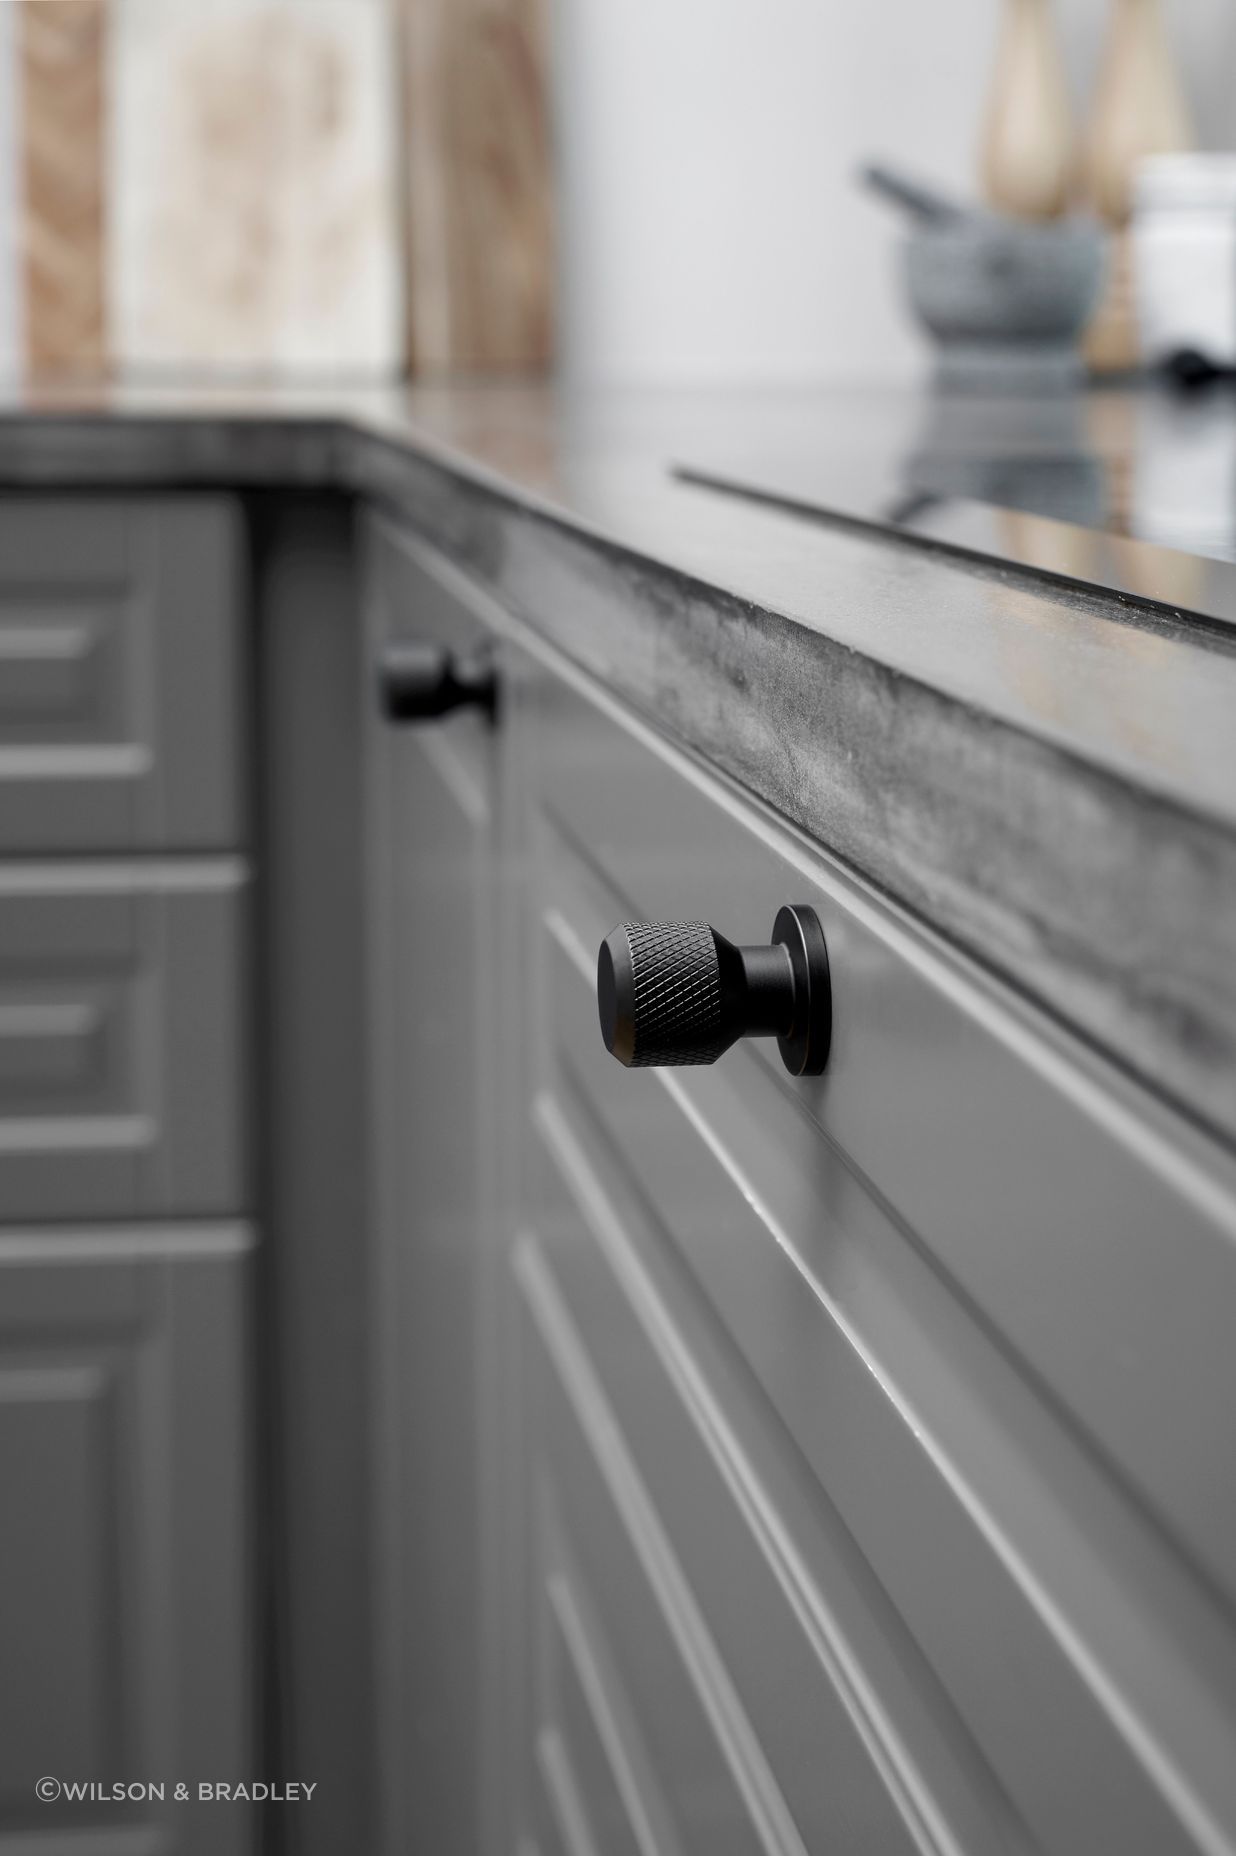 Hardware to accentuate the style of your cabinets.